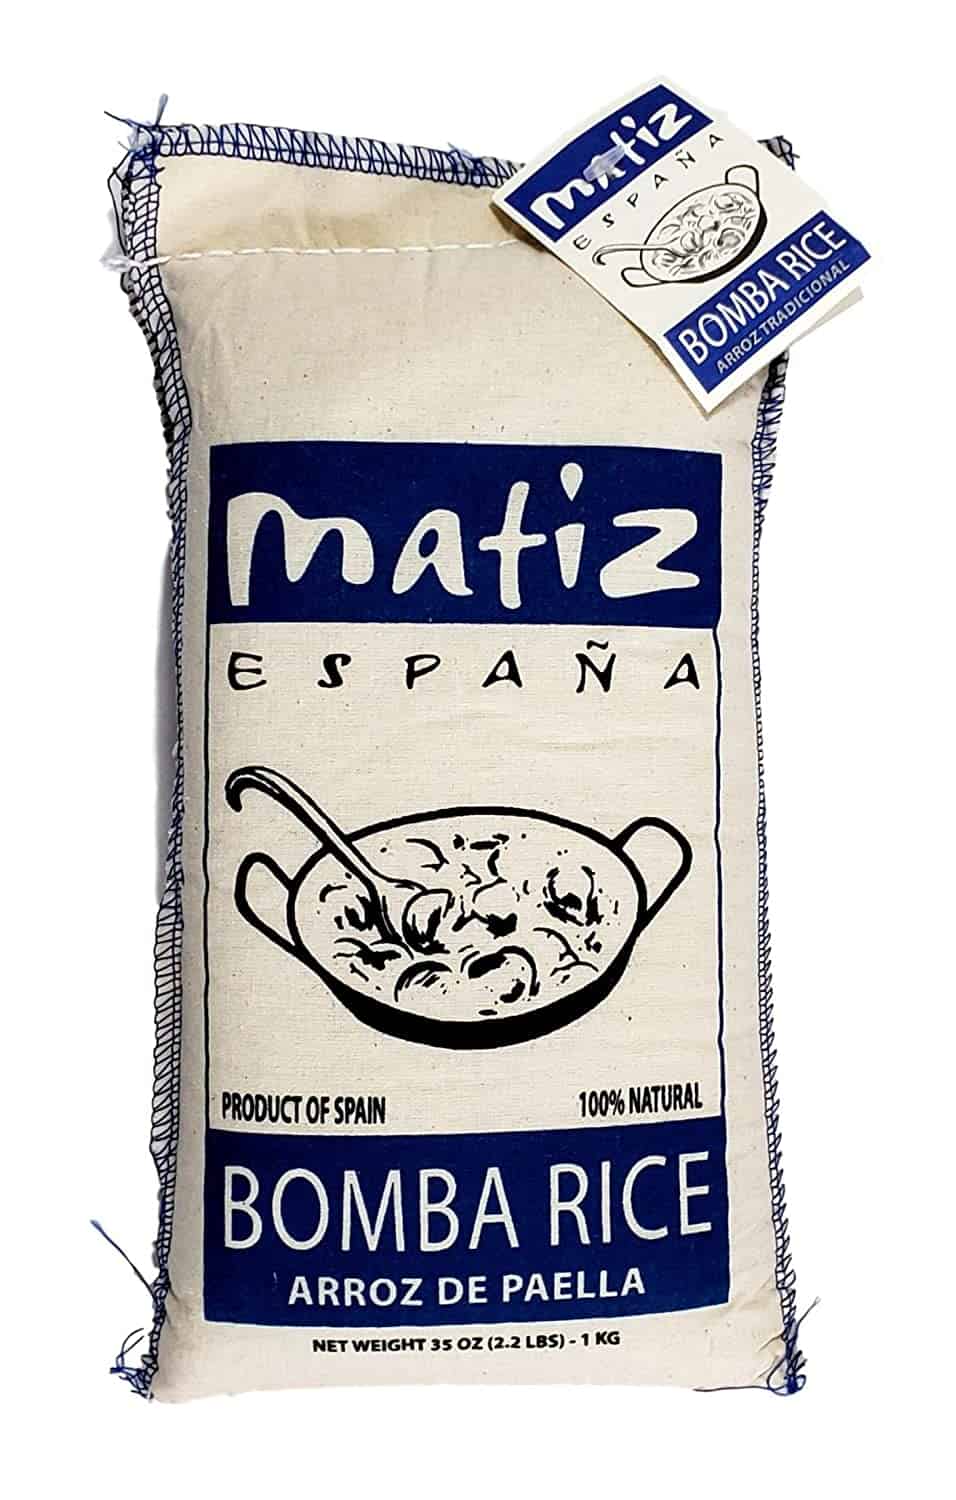 Spanish bomba rice as a substitute for glutinous rice